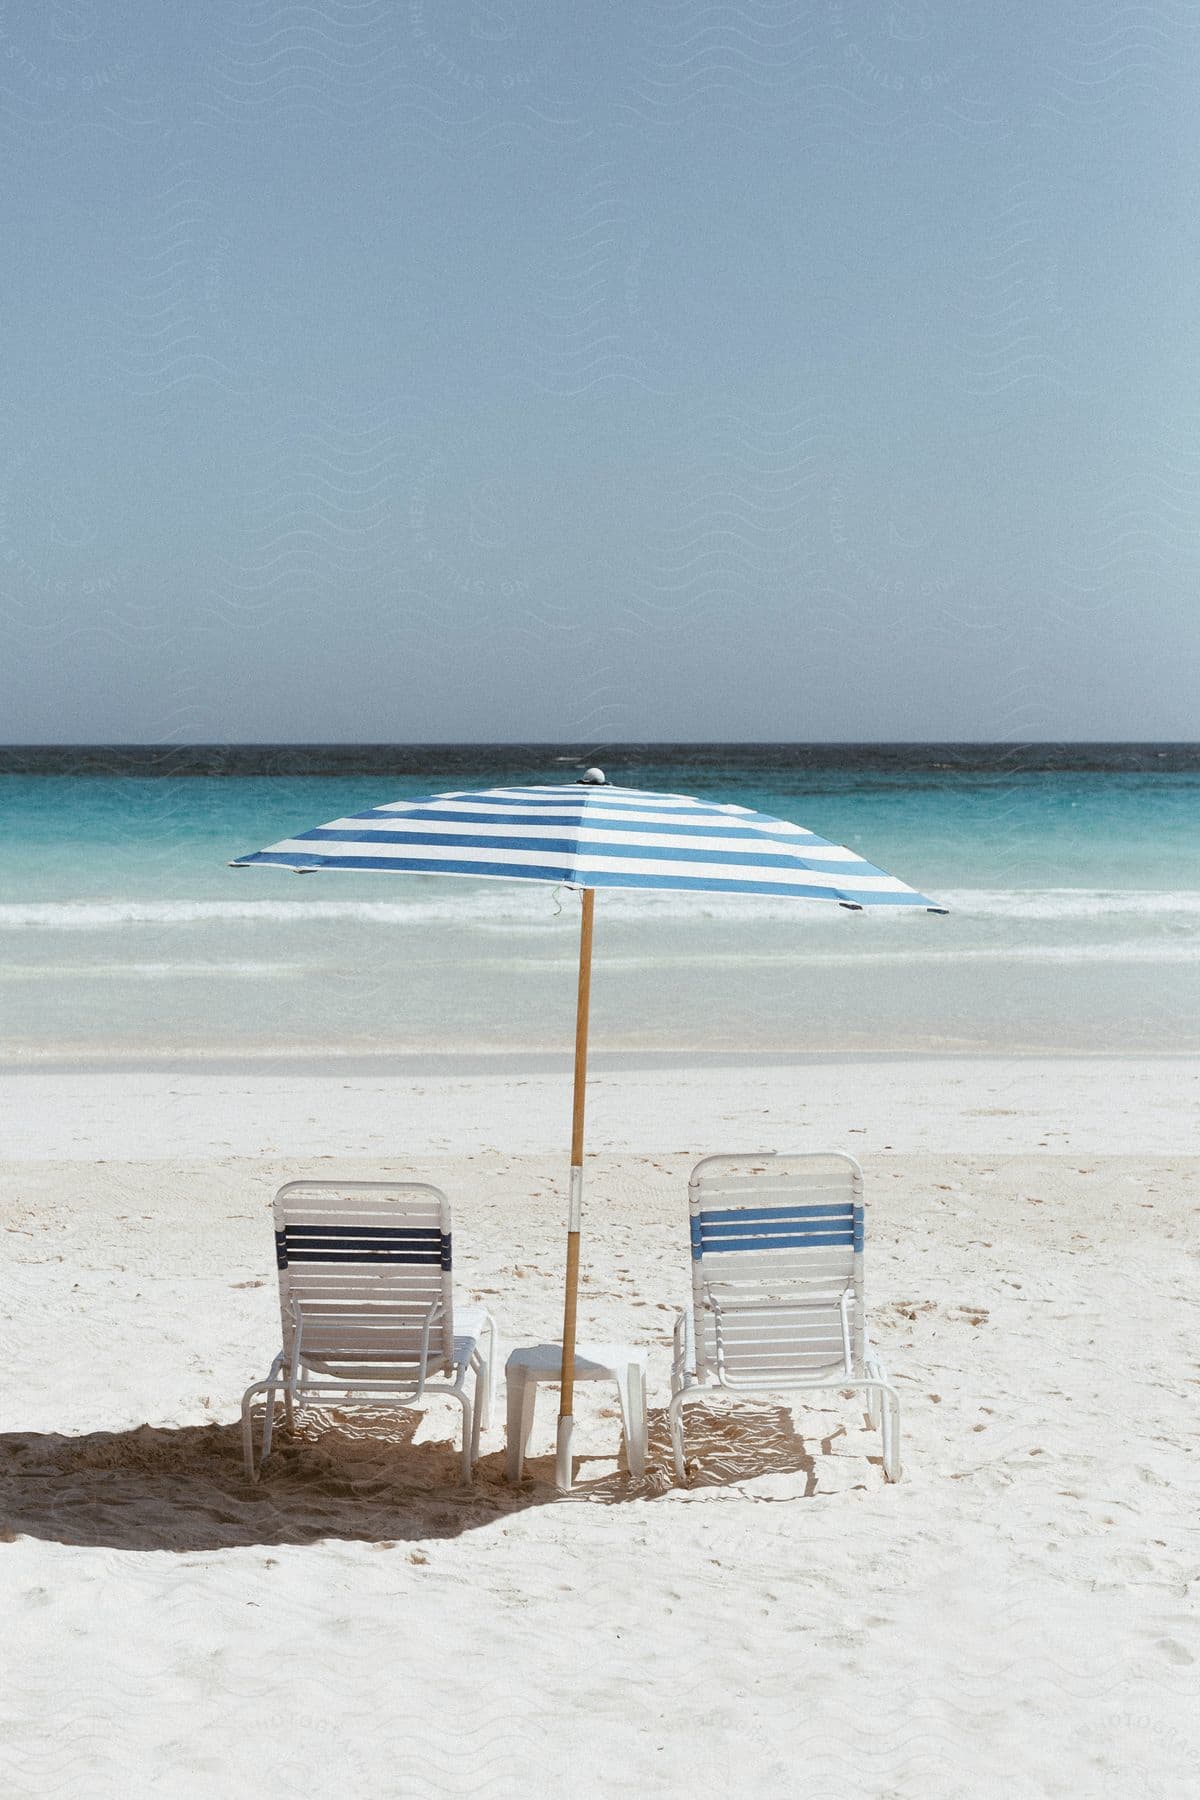 Two beach chairs and an umbrella are on the shoreline